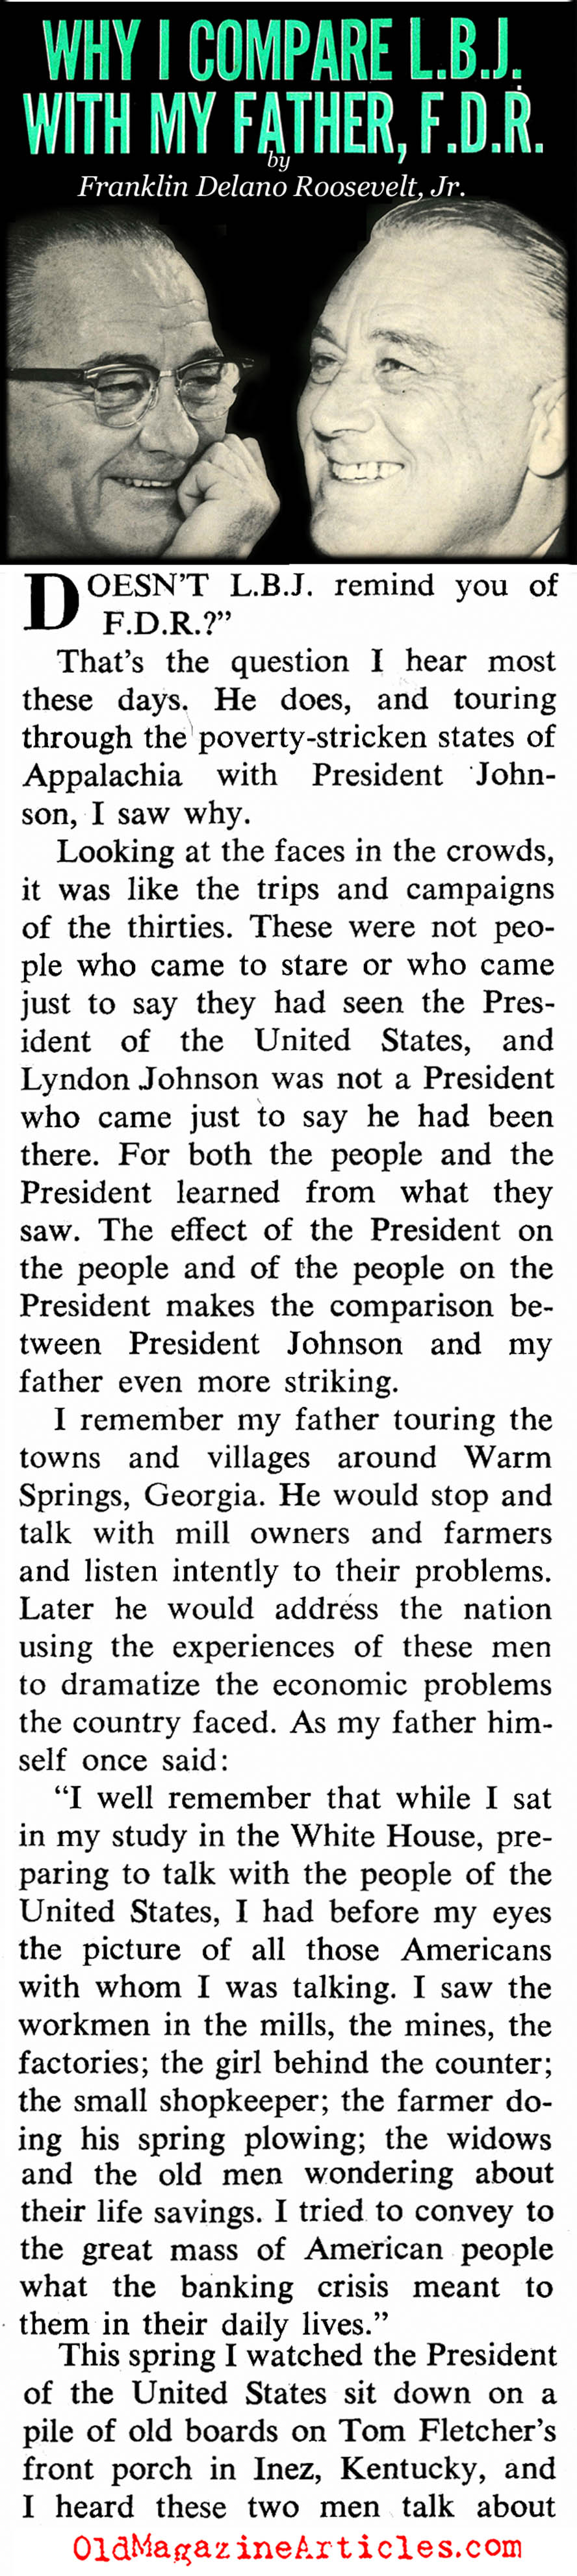 ''Why I Compare LBJ with my Father, FDR'' (Coronet Magazine, 1964)